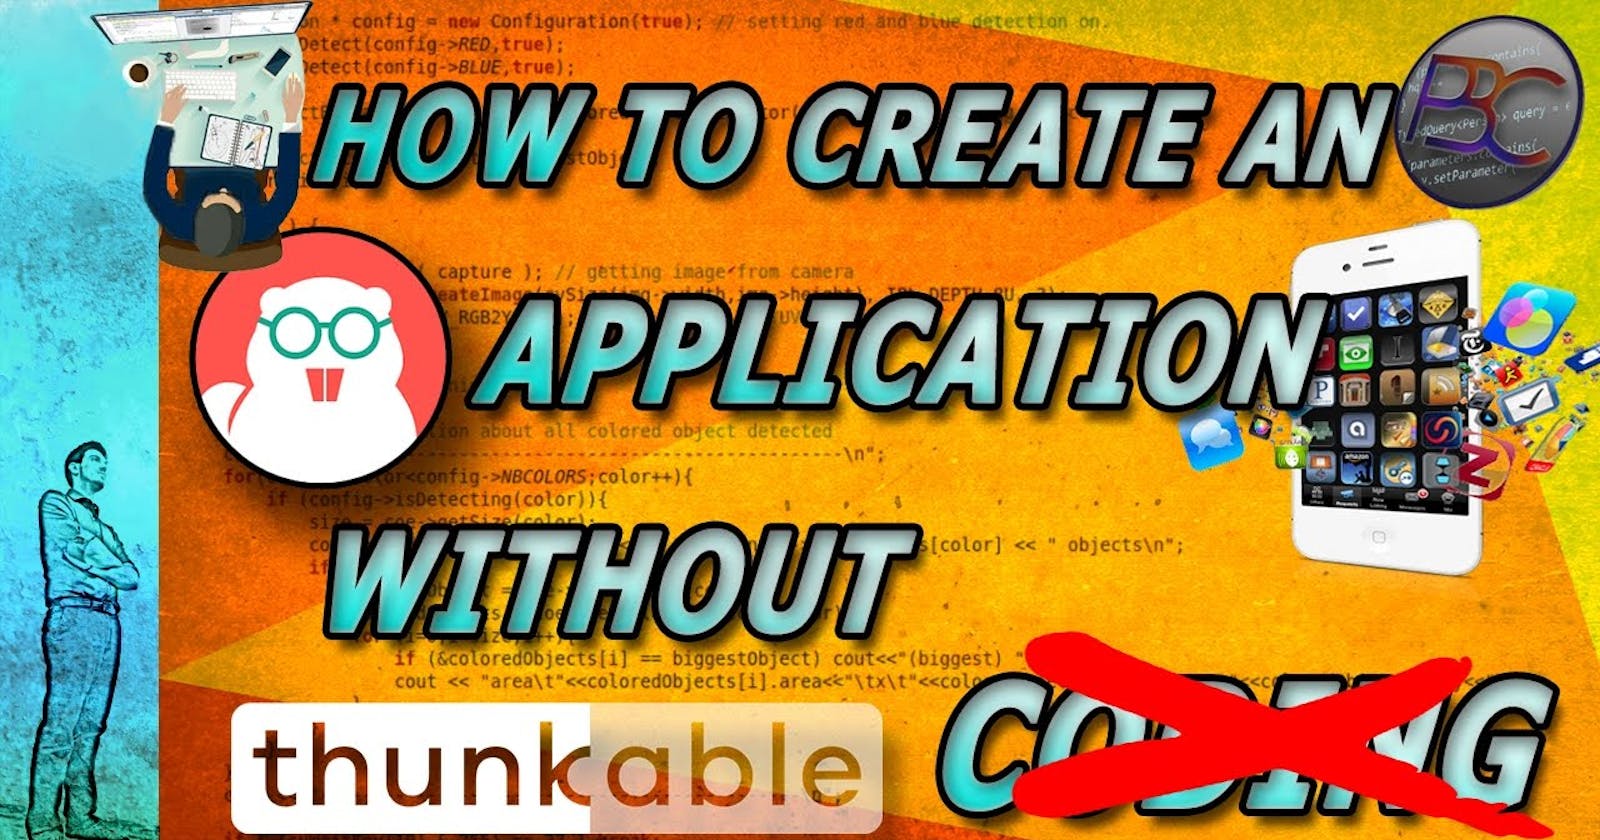 How To Create an App without Coding or Programmig skills | Guide and Review of Thunkable